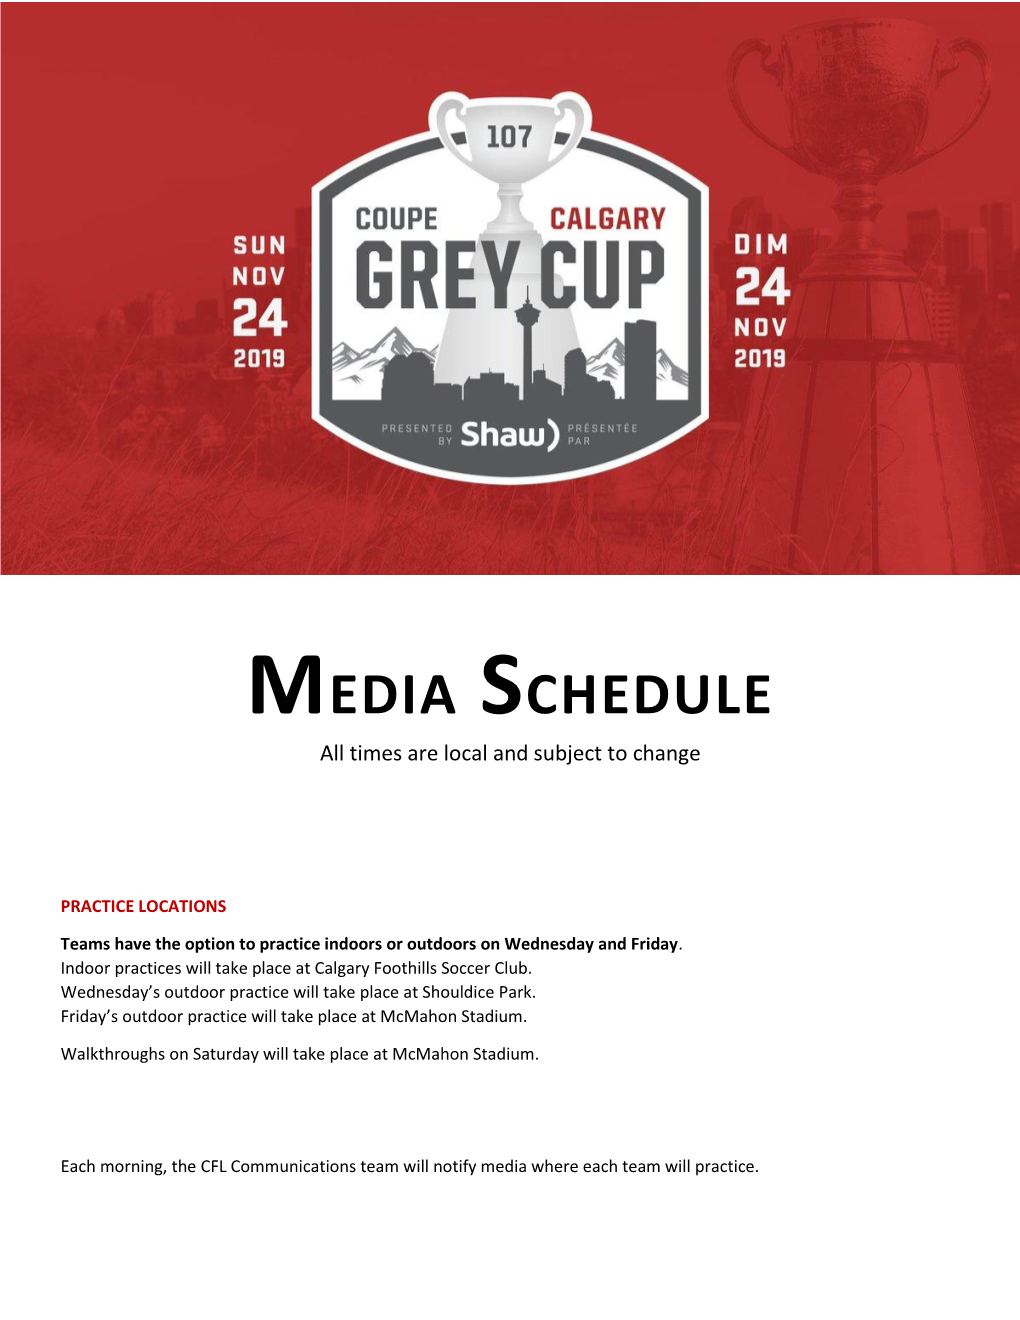 MEDIA SCHEDULE All Times Are Local and Subject to Change